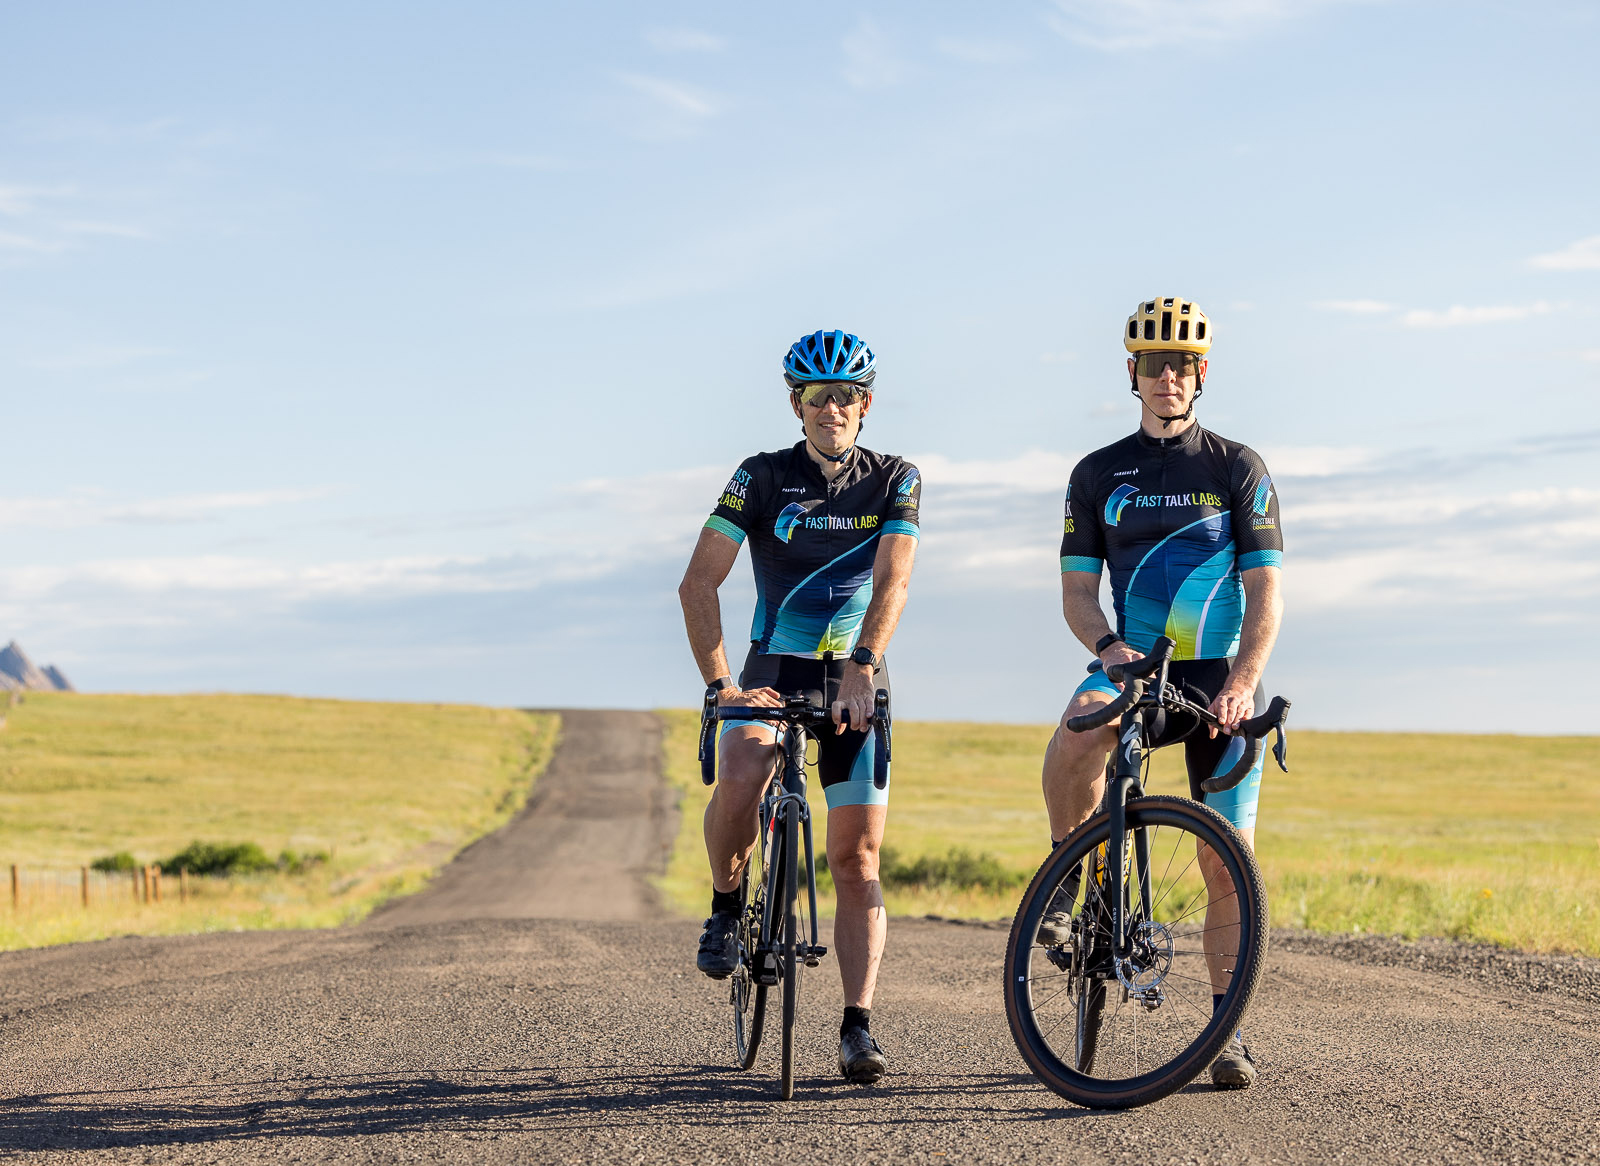 Trevor Connor and Rob Pickels standing above their bikes on a gravel road near the Flatirons in Boulder, Colorado.